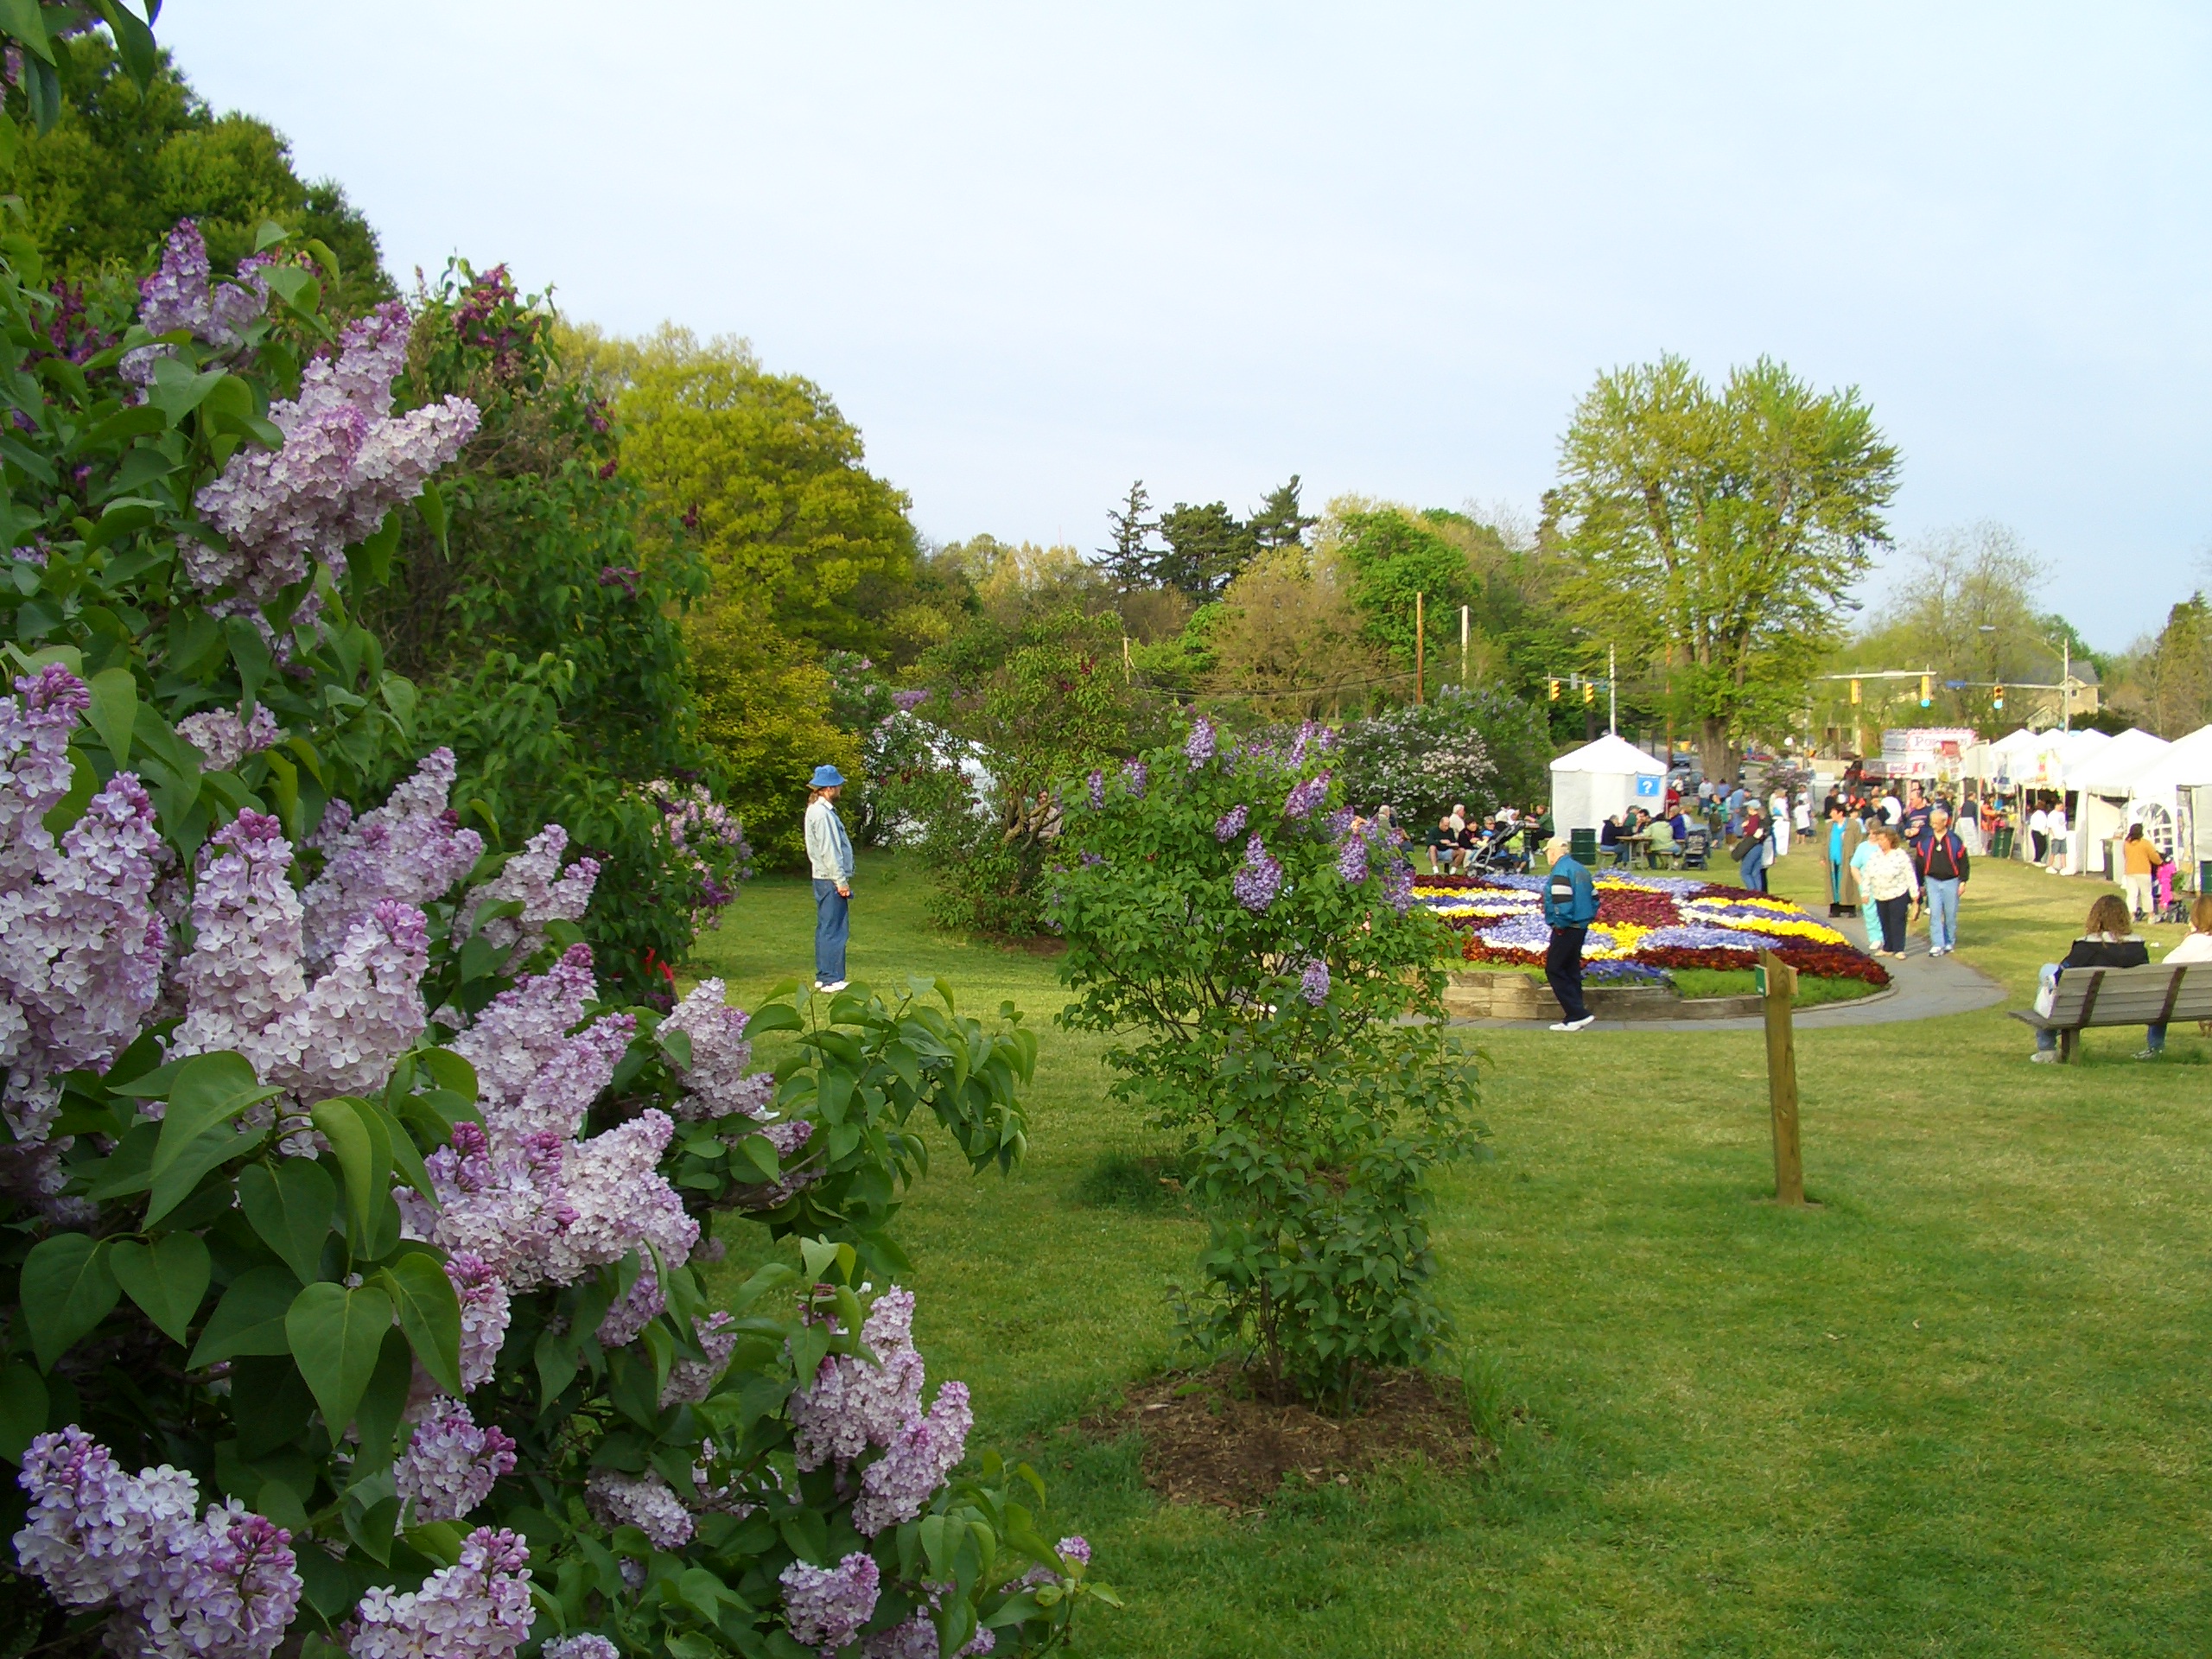 lilac festival image sourced from wikipedia